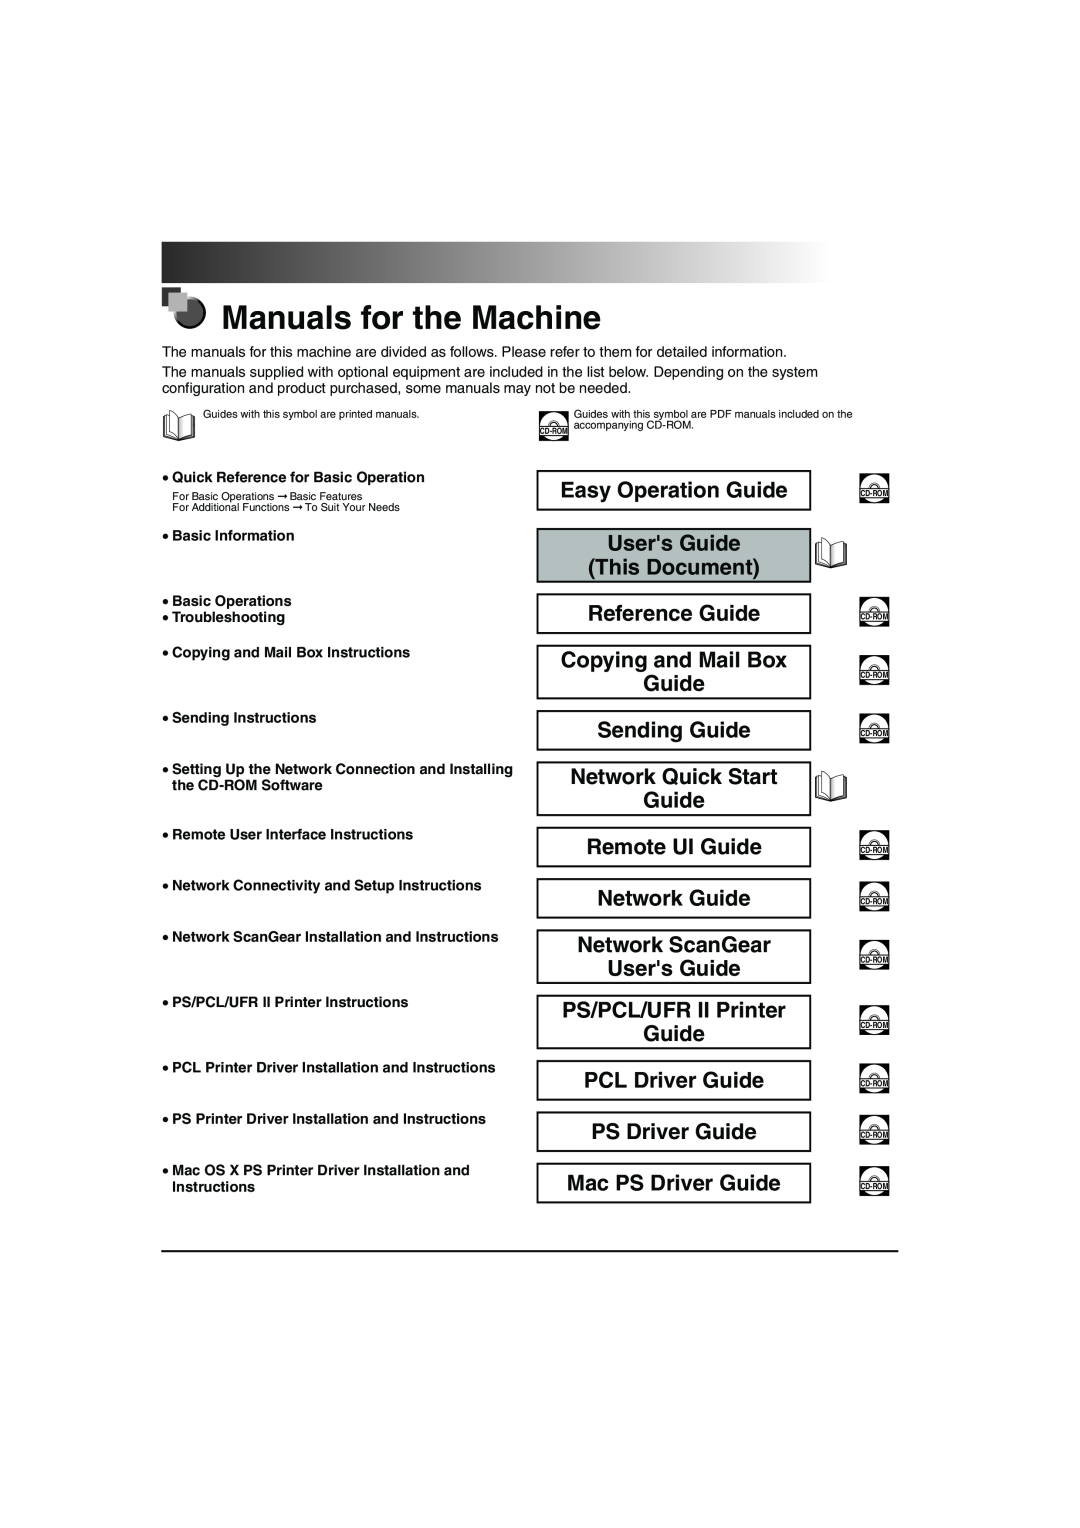 Canon iR6570 manual Manuals for the Machine, Easy Operation Guide Users Guide This Document 